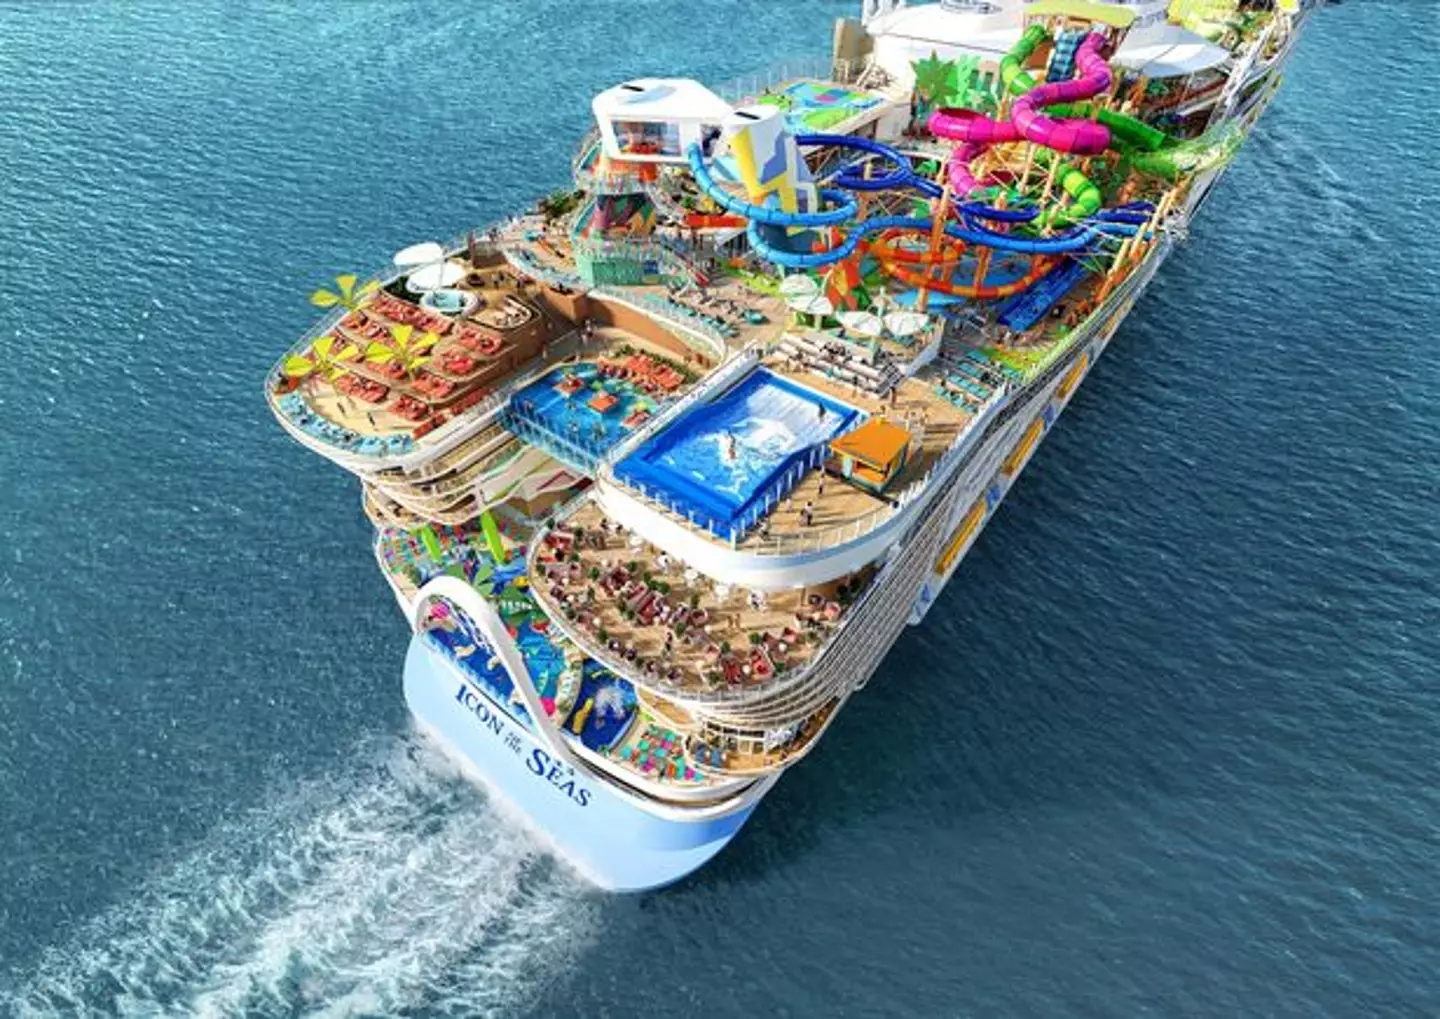 The gigantic waterpark on board.